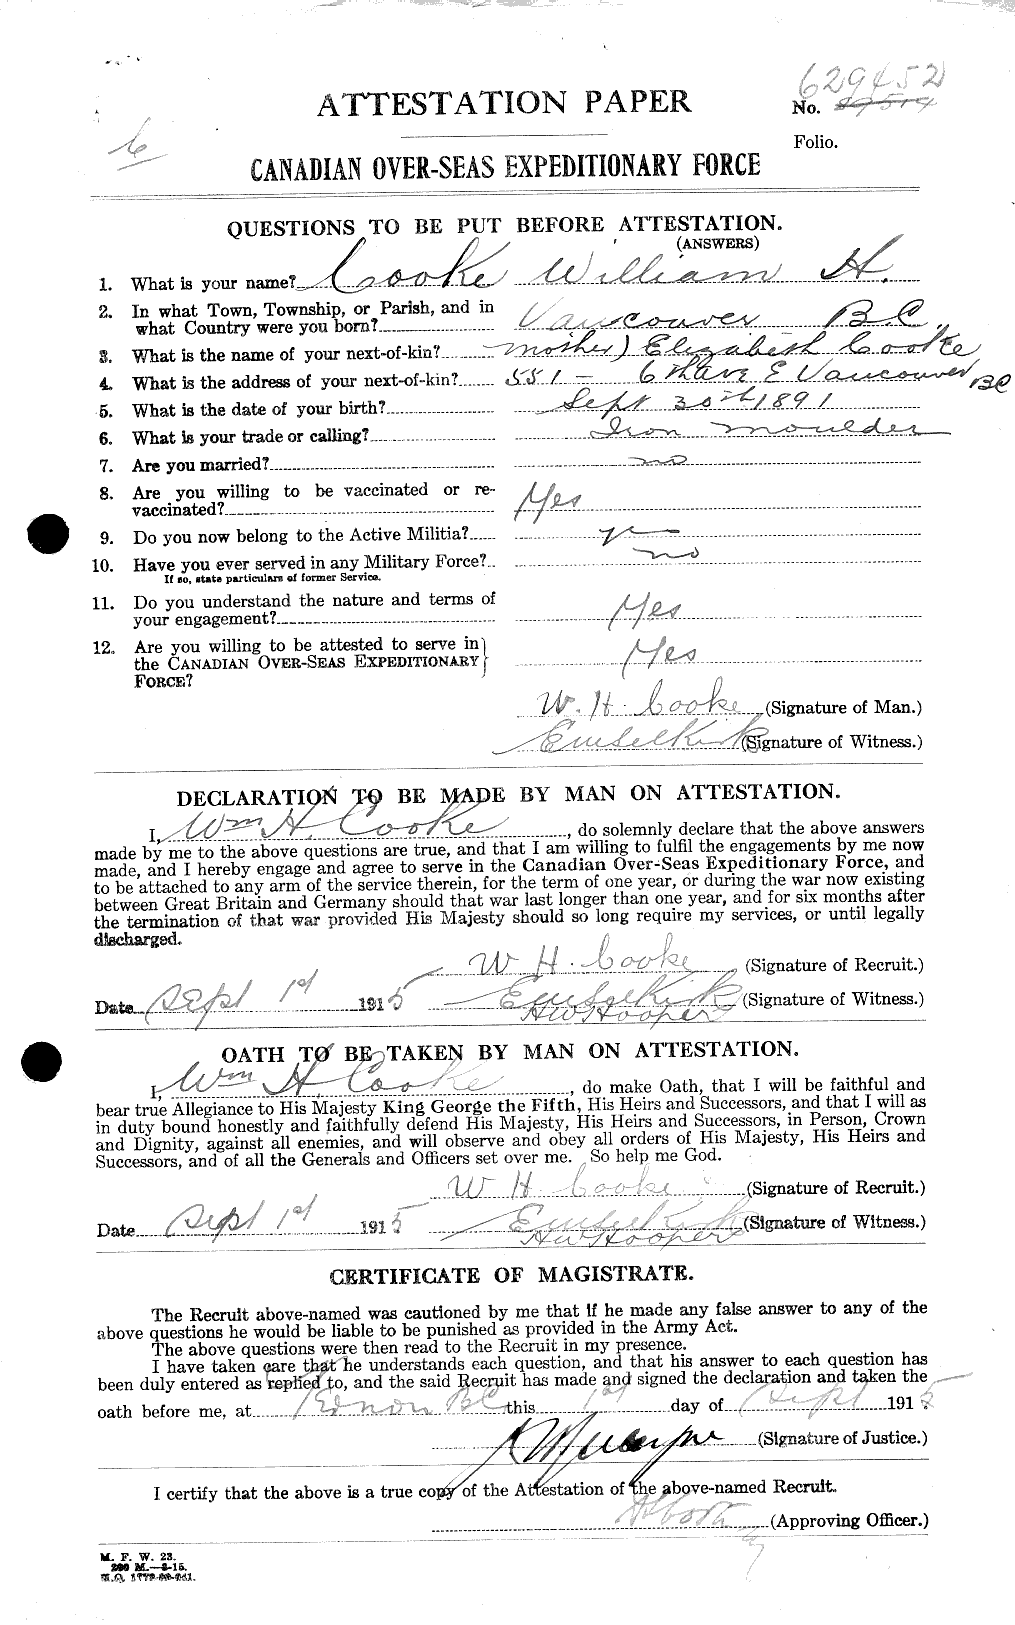 Personnel Records of the First World War - CEF 047283a